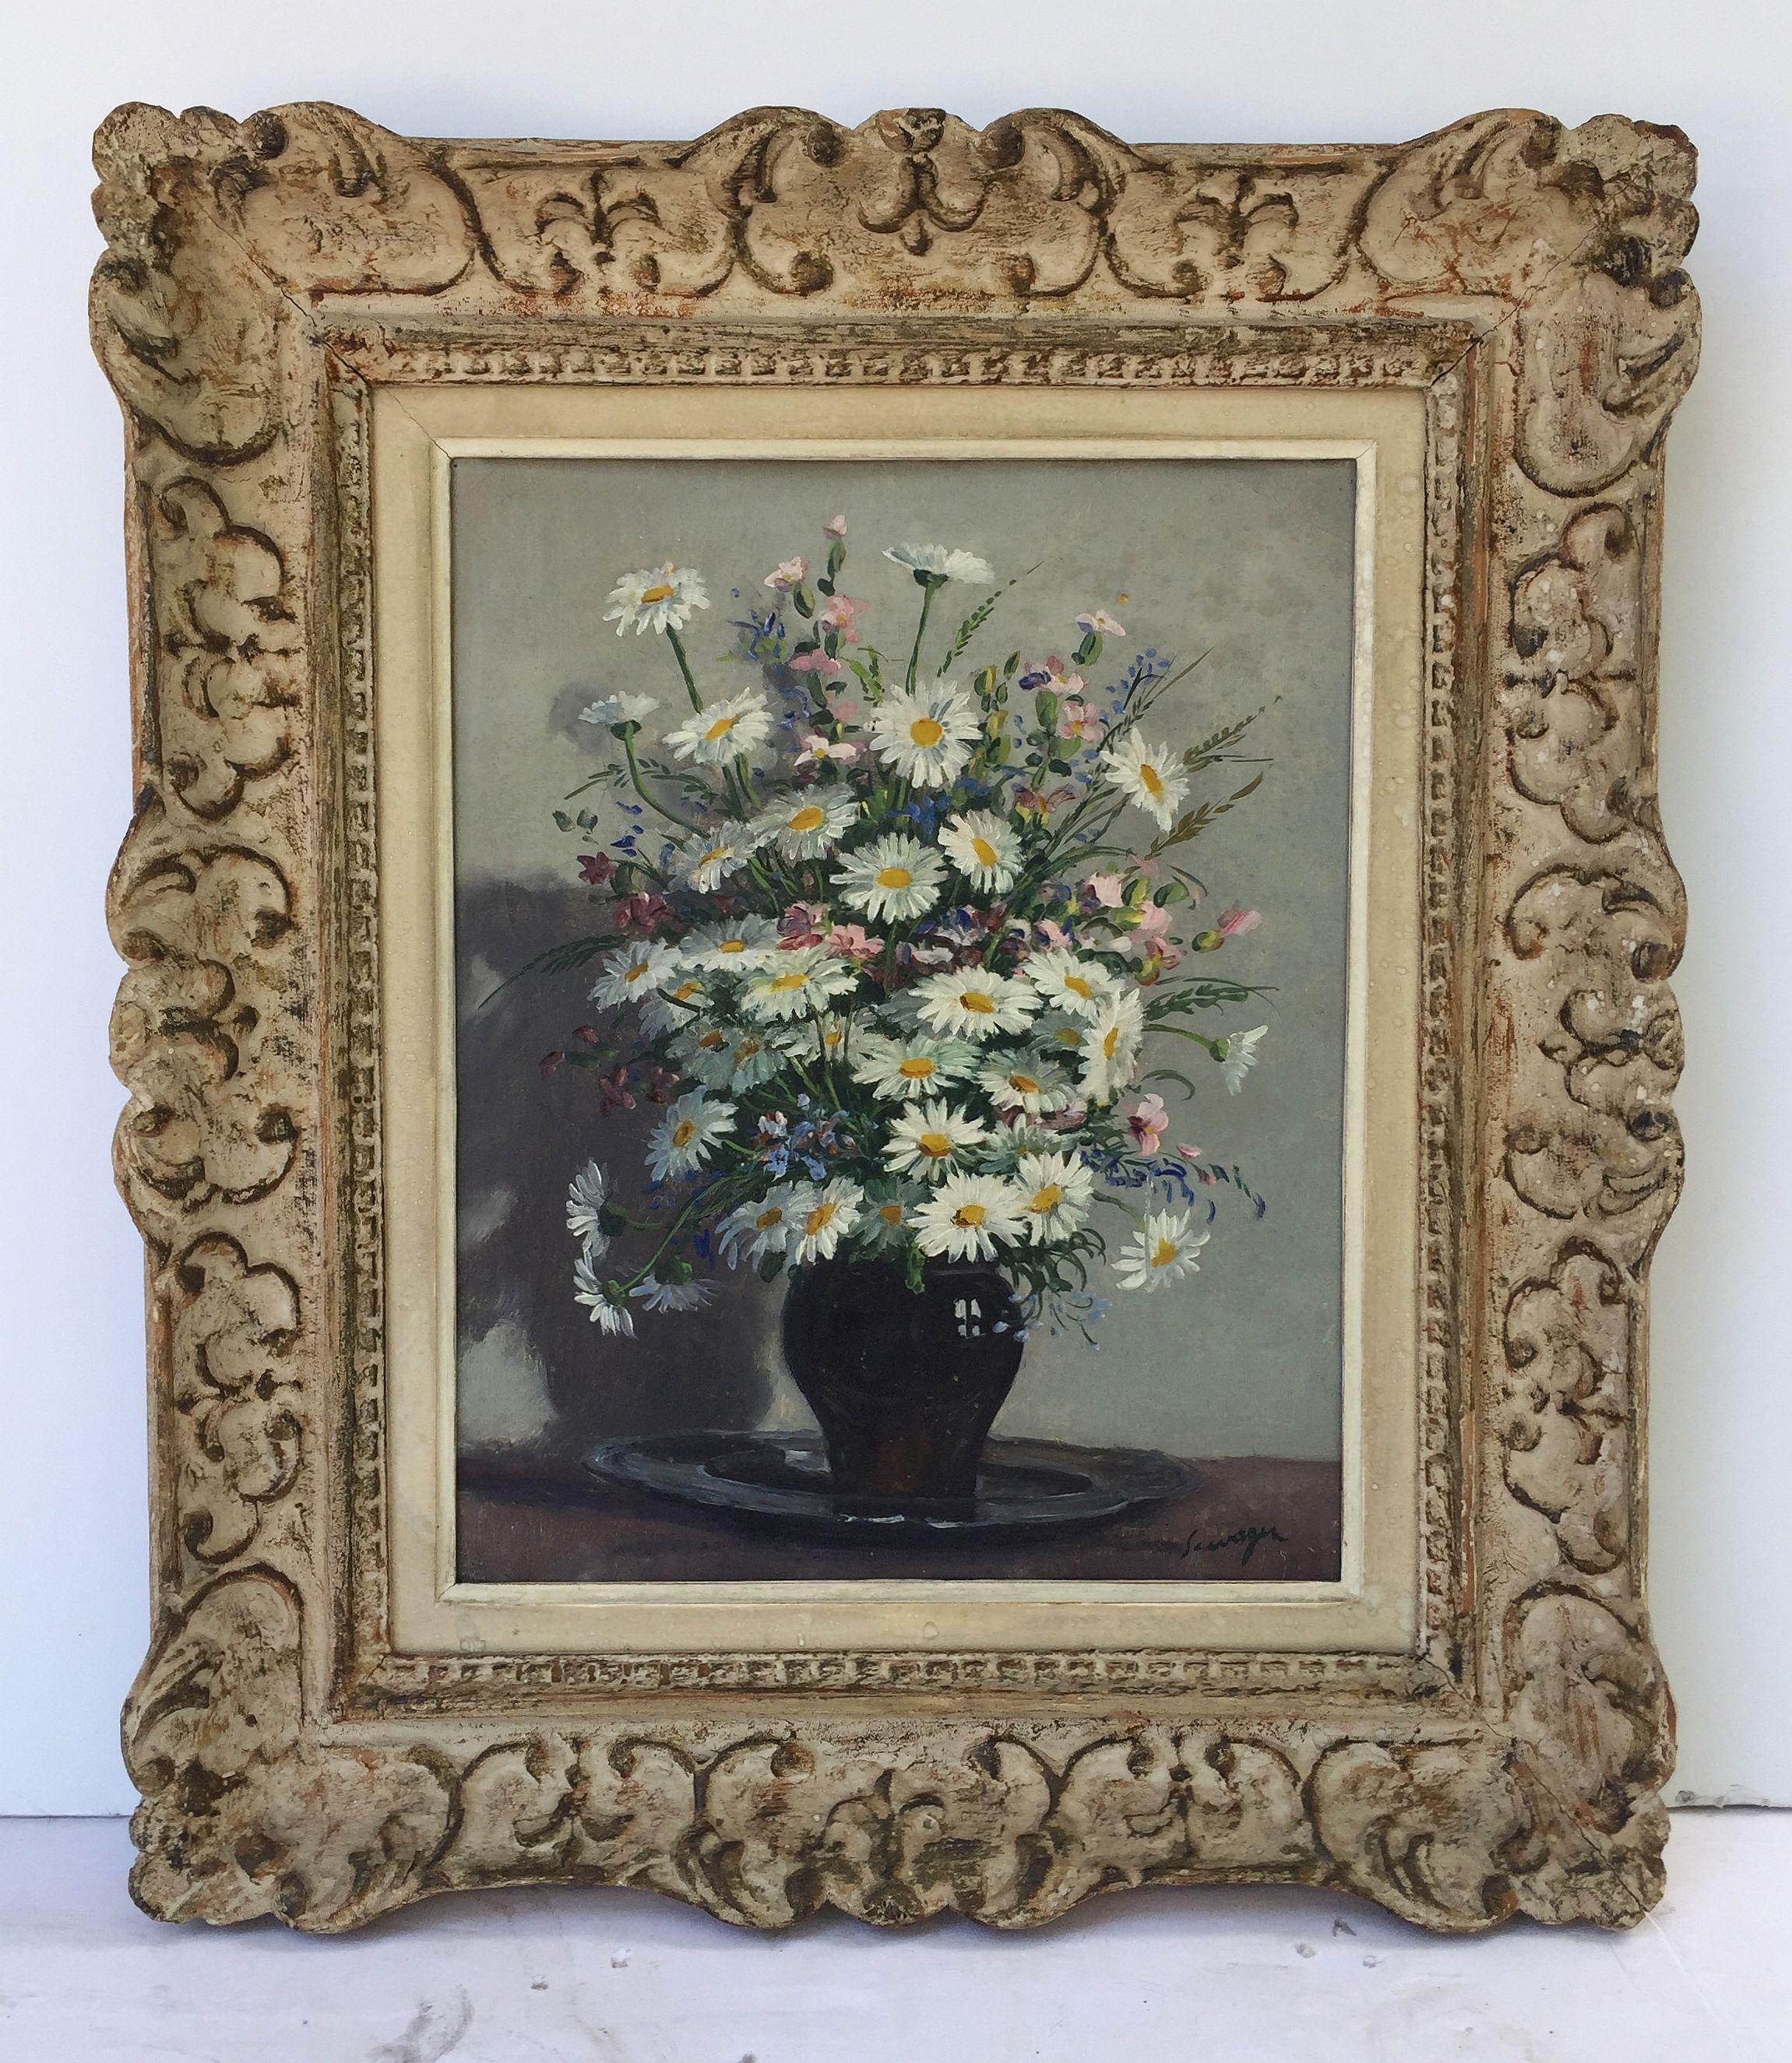 A fine French oil painting on canvas featuring a still life of a vase of flowers in a Montparnasse carved wooden frame.

The Montparnasse frame takes its name from the Parisian district where it was born, at the beginning of the 20th century.